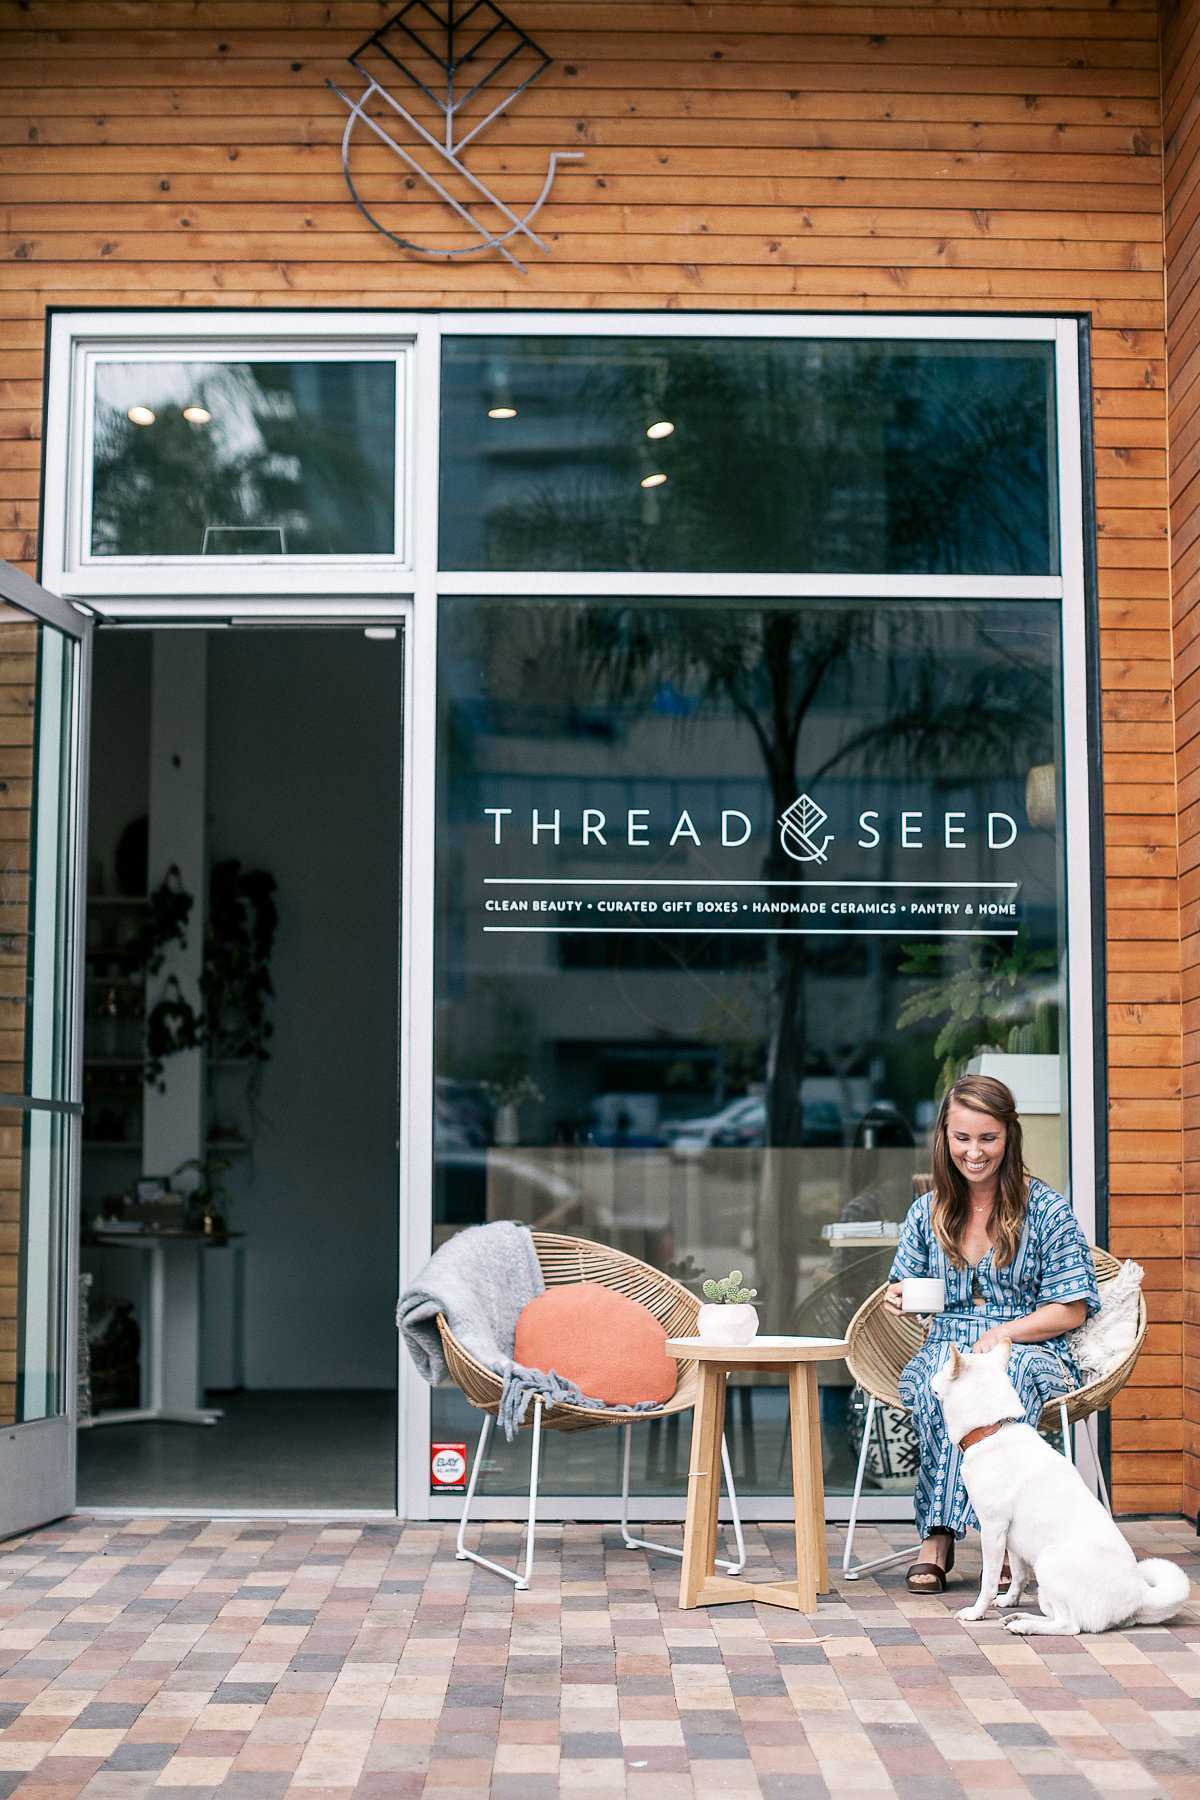 Thread & Seed in Banker's Hill.